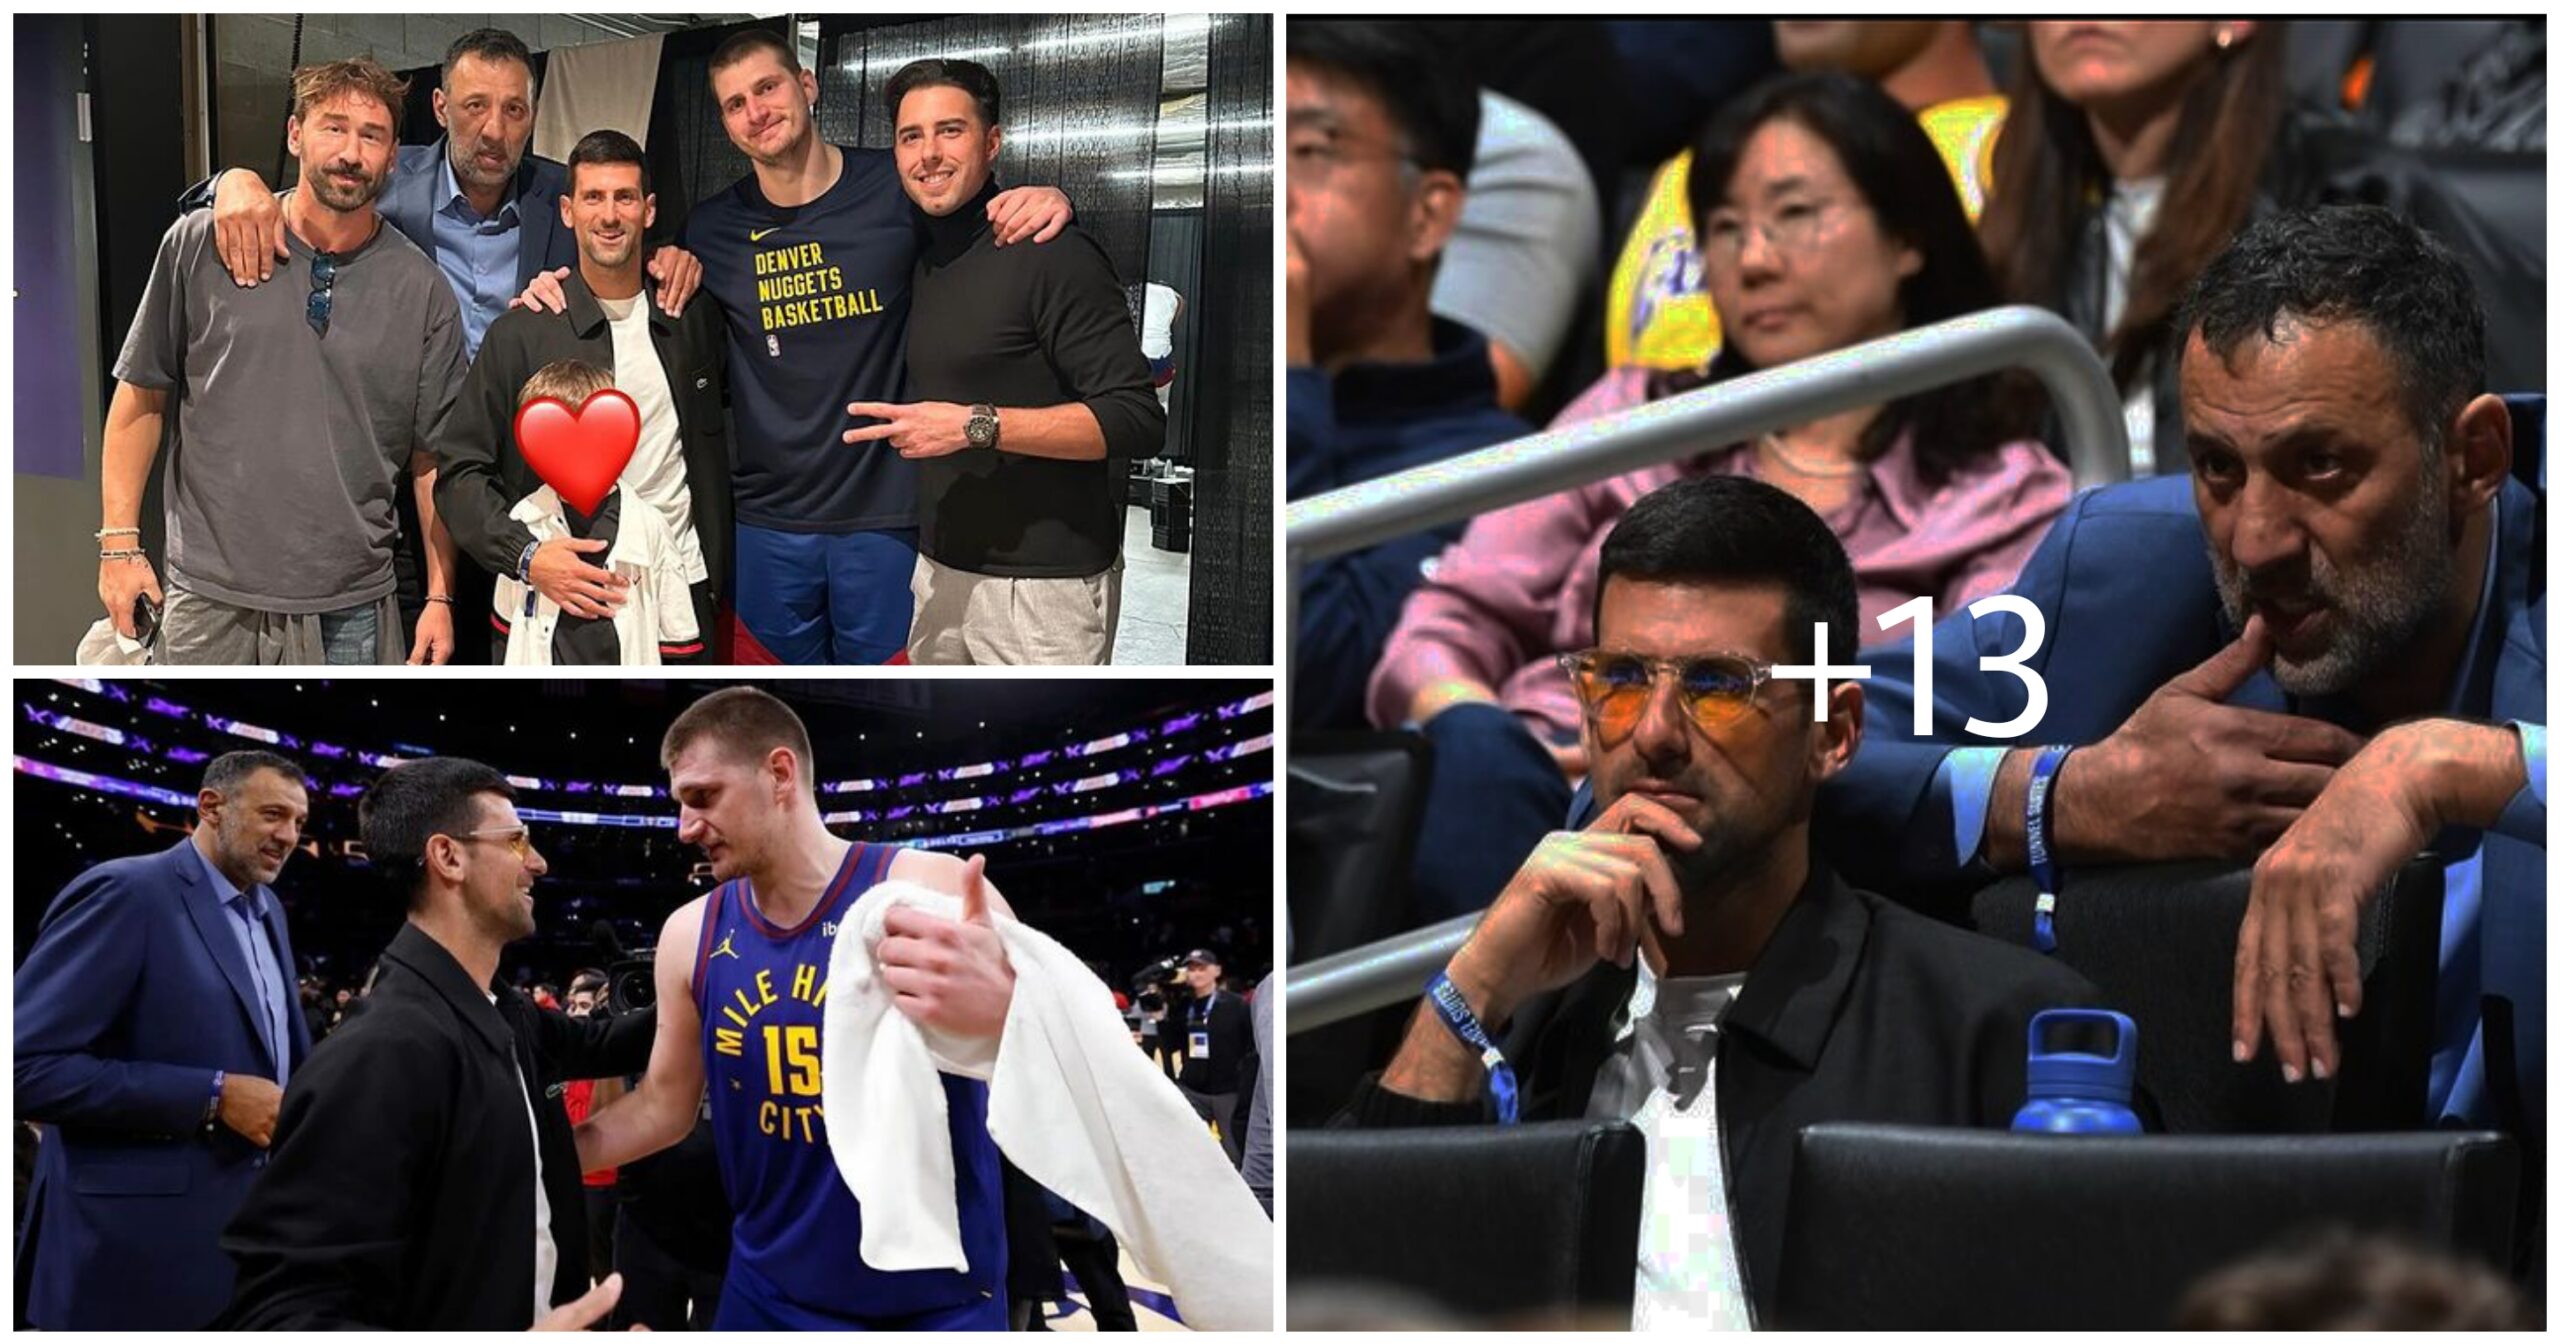 Novak Djokovic visiting the NBA superstars and meeting with friends at los Angeles, California [PHOTOS].